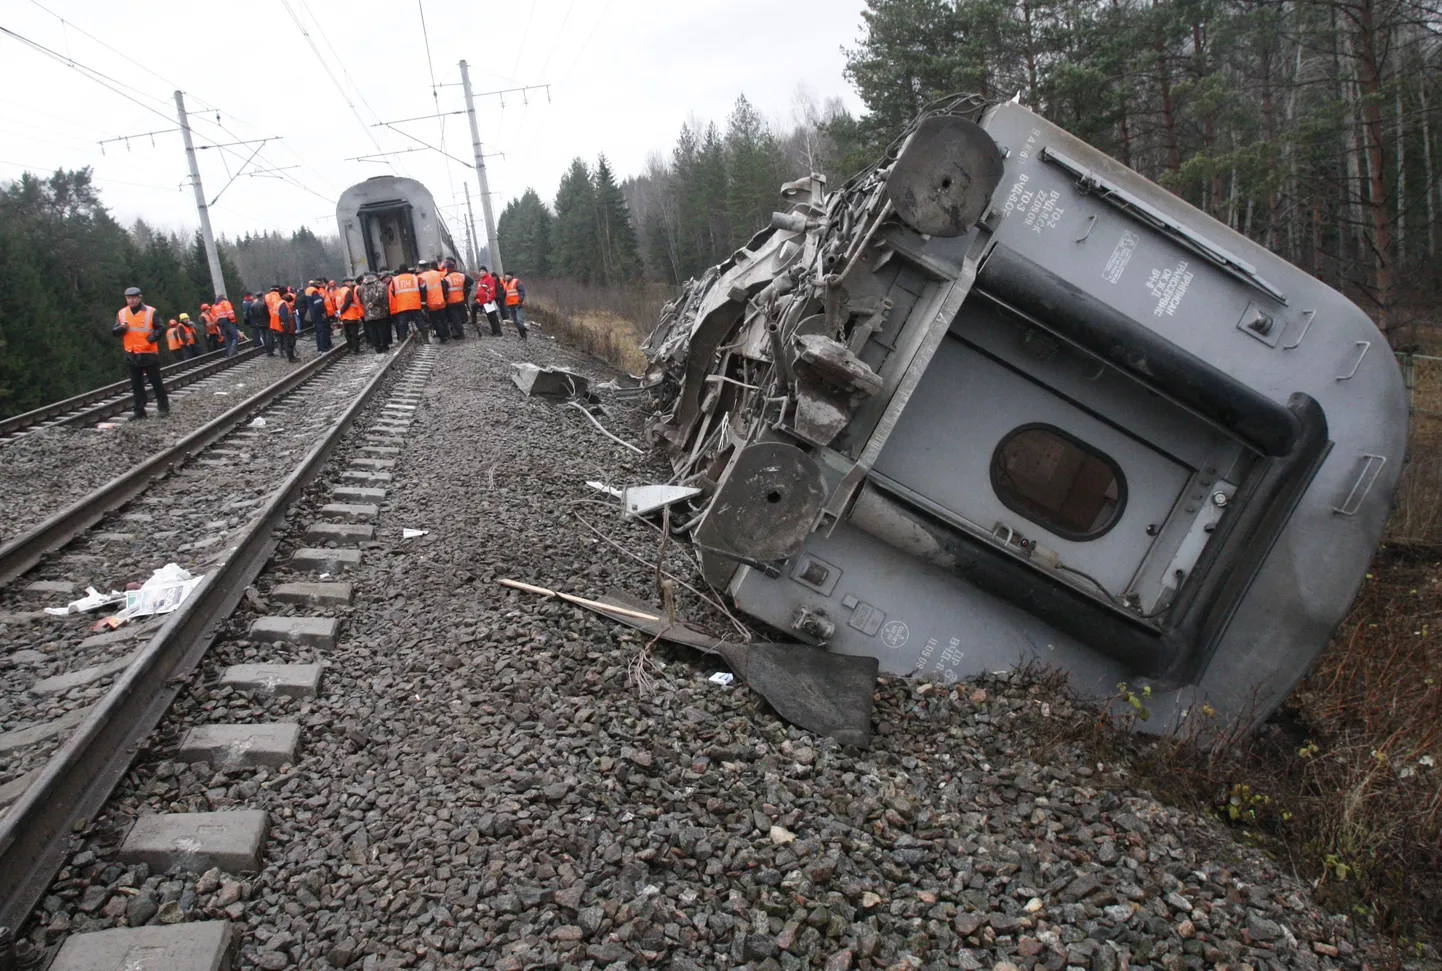 Railroad workers stand next to a damaged coach at the site of a train derailment near the town of Uglovka, some 400 km (250 miles) north-east of Moscow, Russia, Saturday, Nov. 28, 2009. An express train carrying hundreds of passengers from Moscow to St. Petersburg derailed, killing dozens of people and injuring scores of others in what may have been an act of sabotage, Russian officials said. (AP Photo/Ivan Sekretarev) / SCANPIX Code: 436